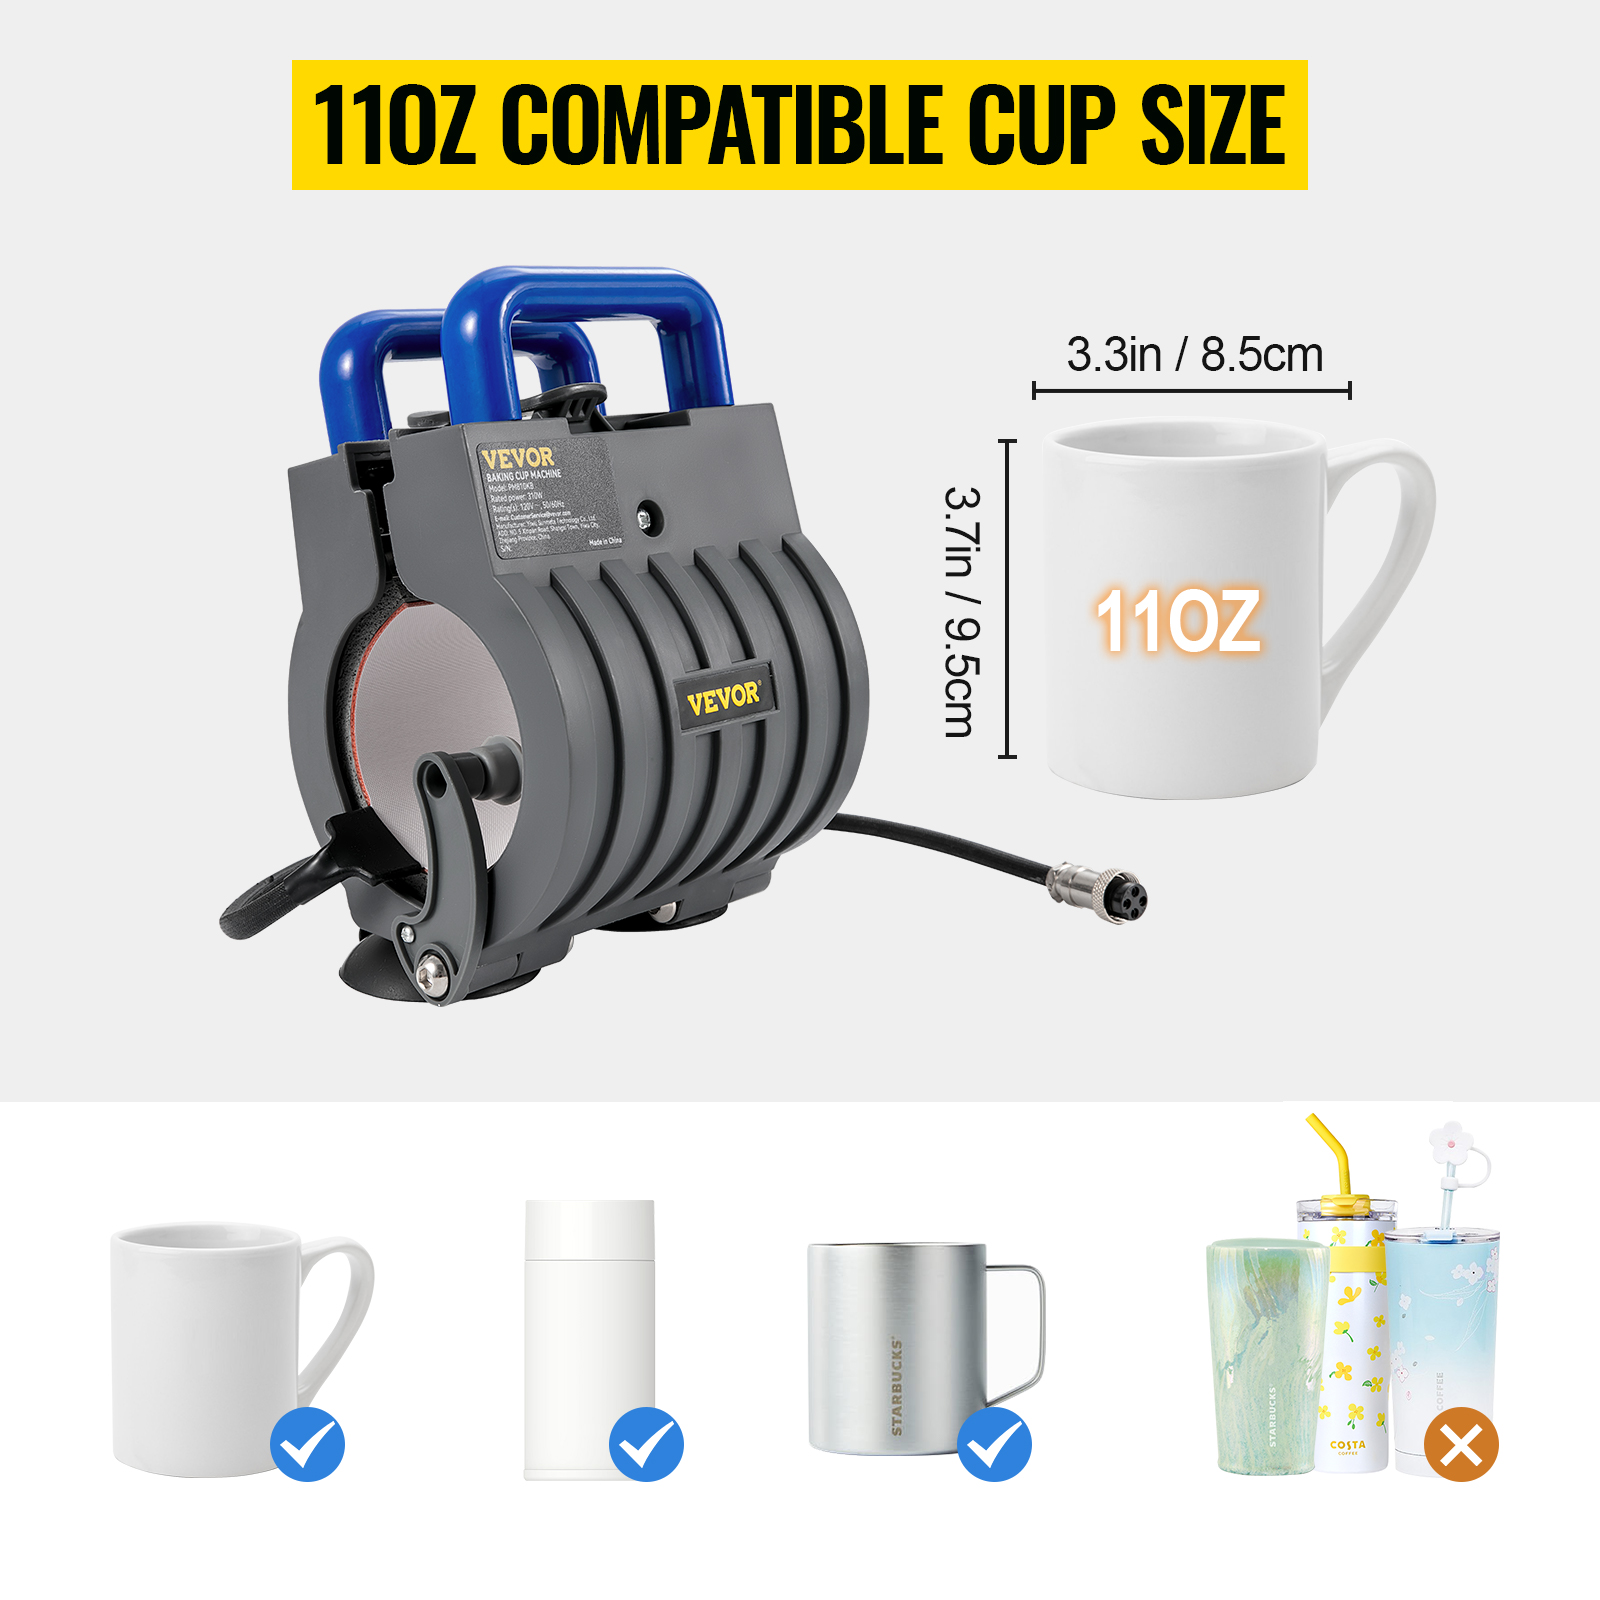  BetterSub Mug Cup Press Heating Transfer Attachment Silica Gel  110V for Heat Press Machine Transfer Sublimation Cylindrical 11oz : Arts,  Crafts & Sewing